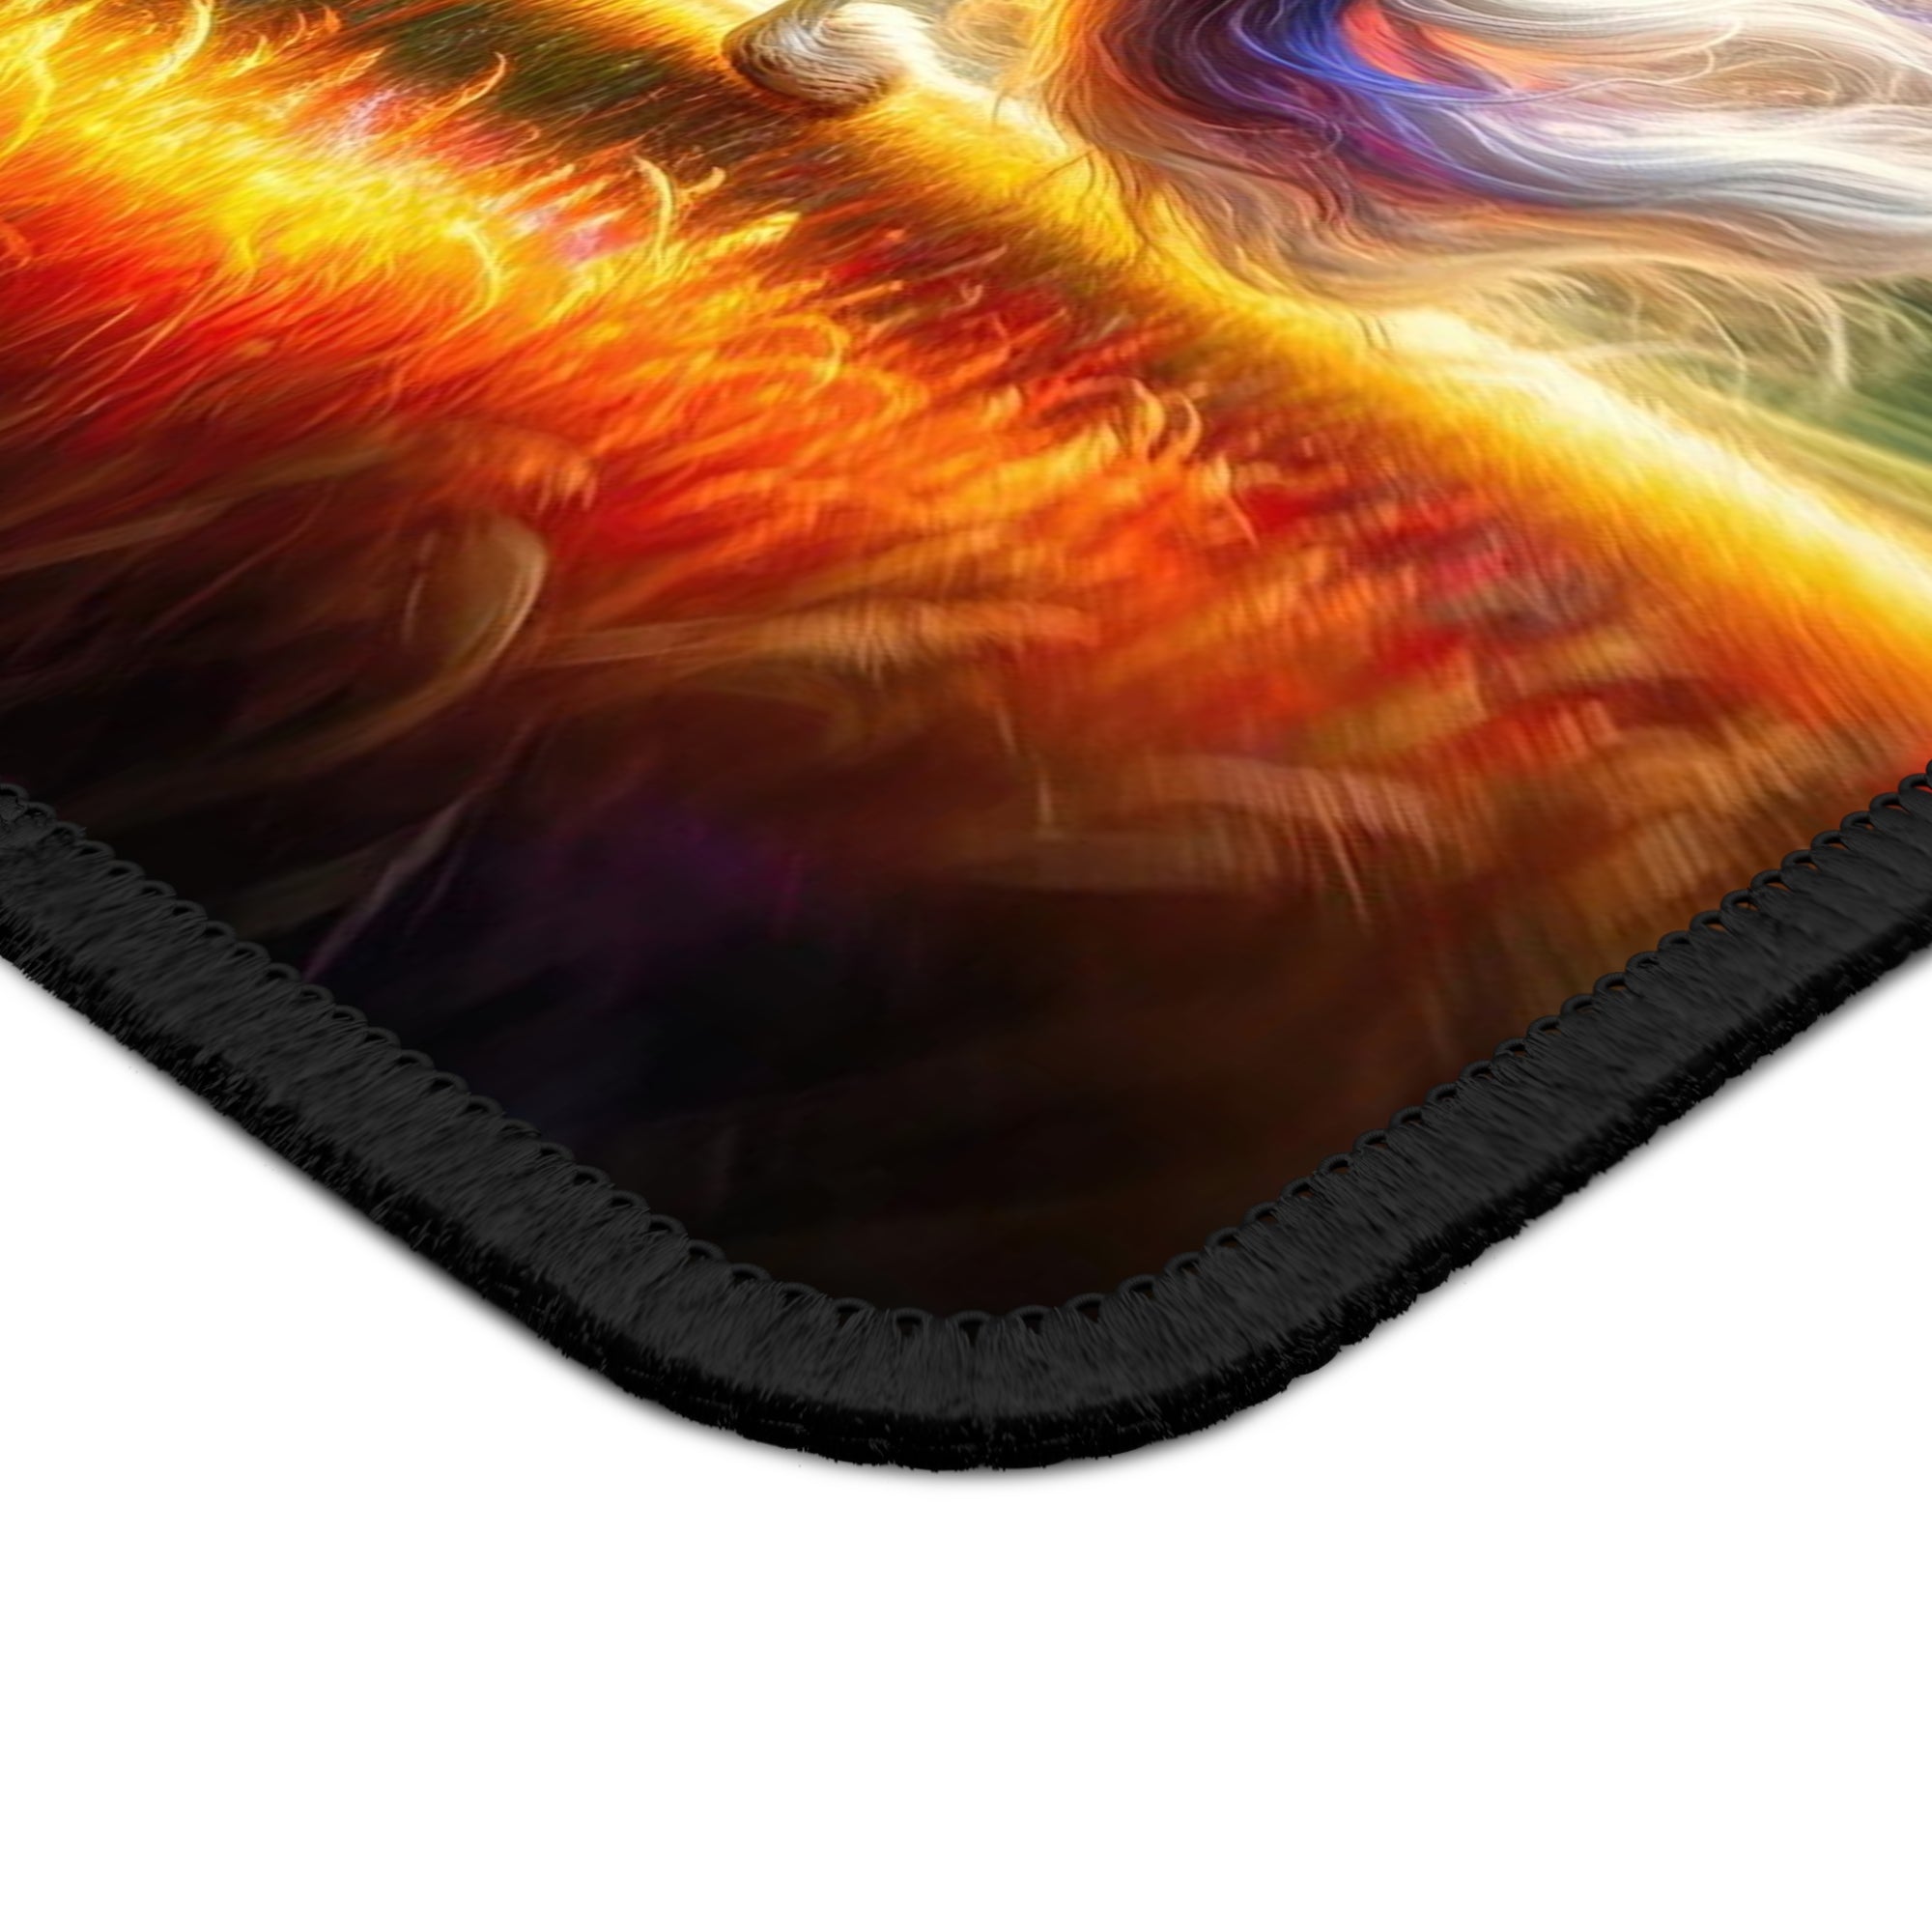 Gallop Beyond Reality Gaming Mouse Pad